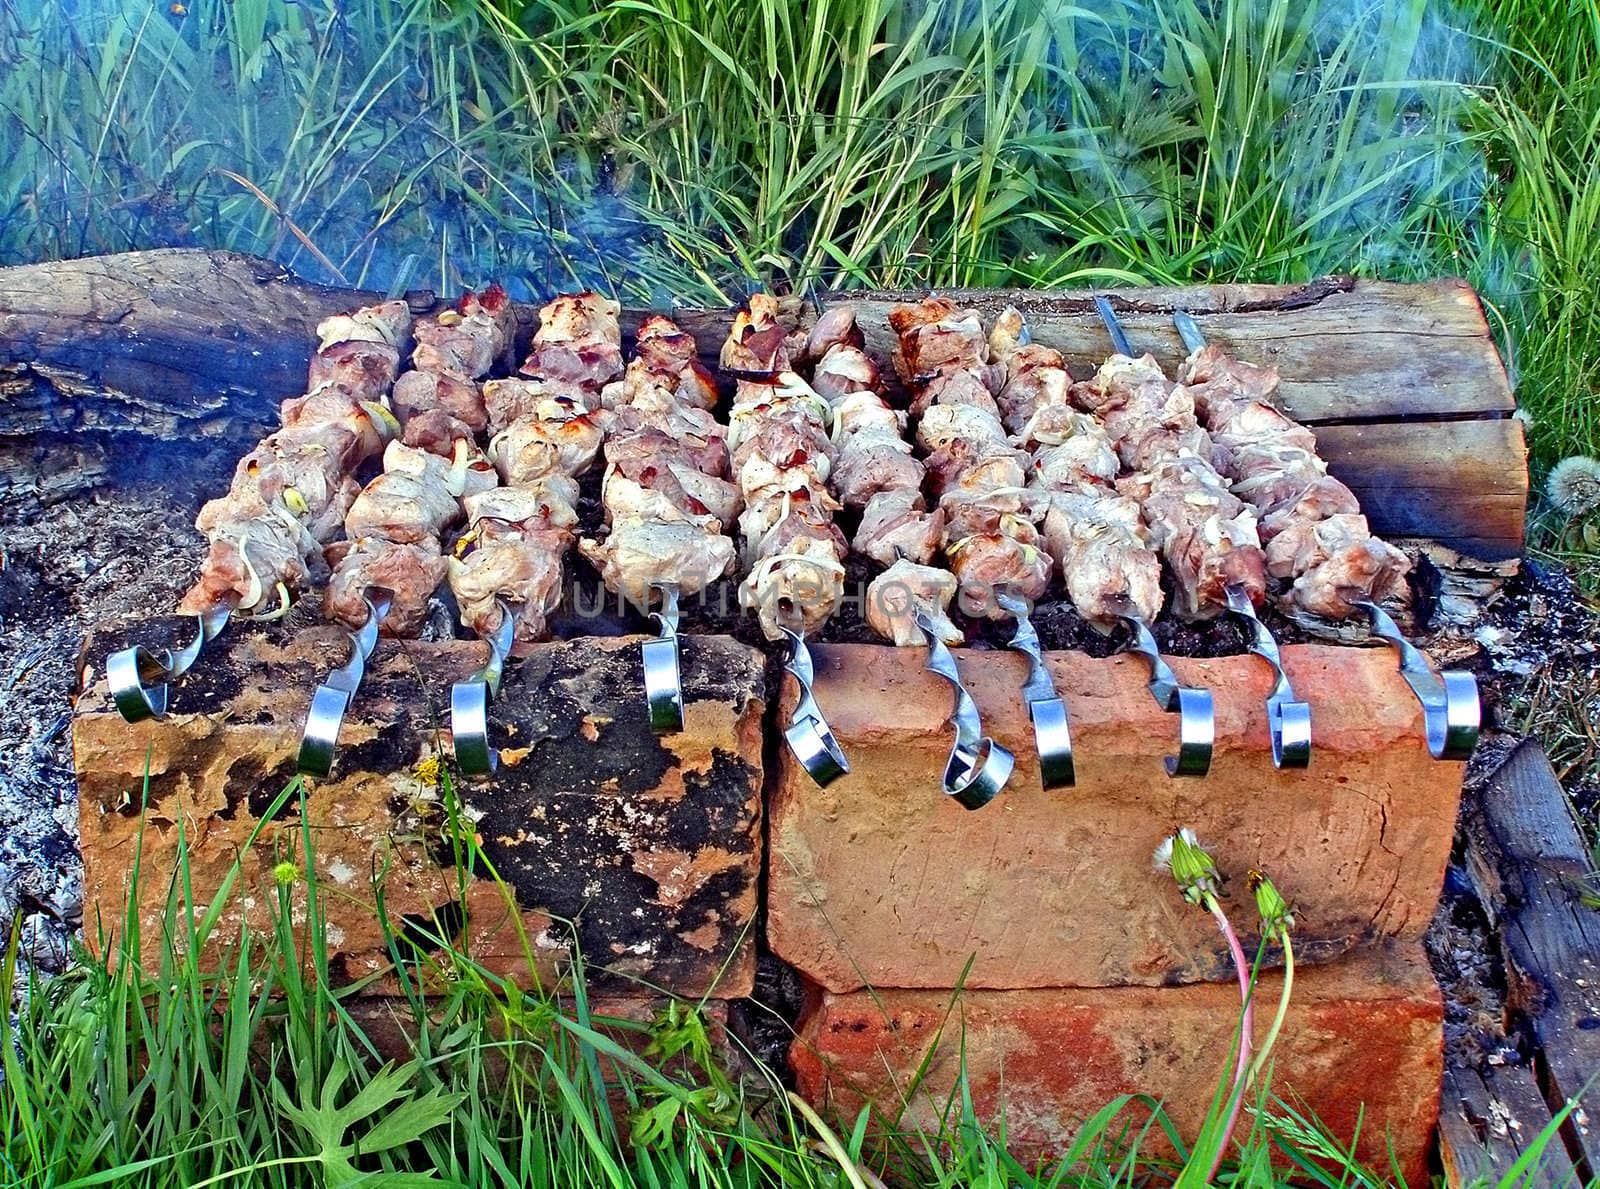 preparation of meat on campfires